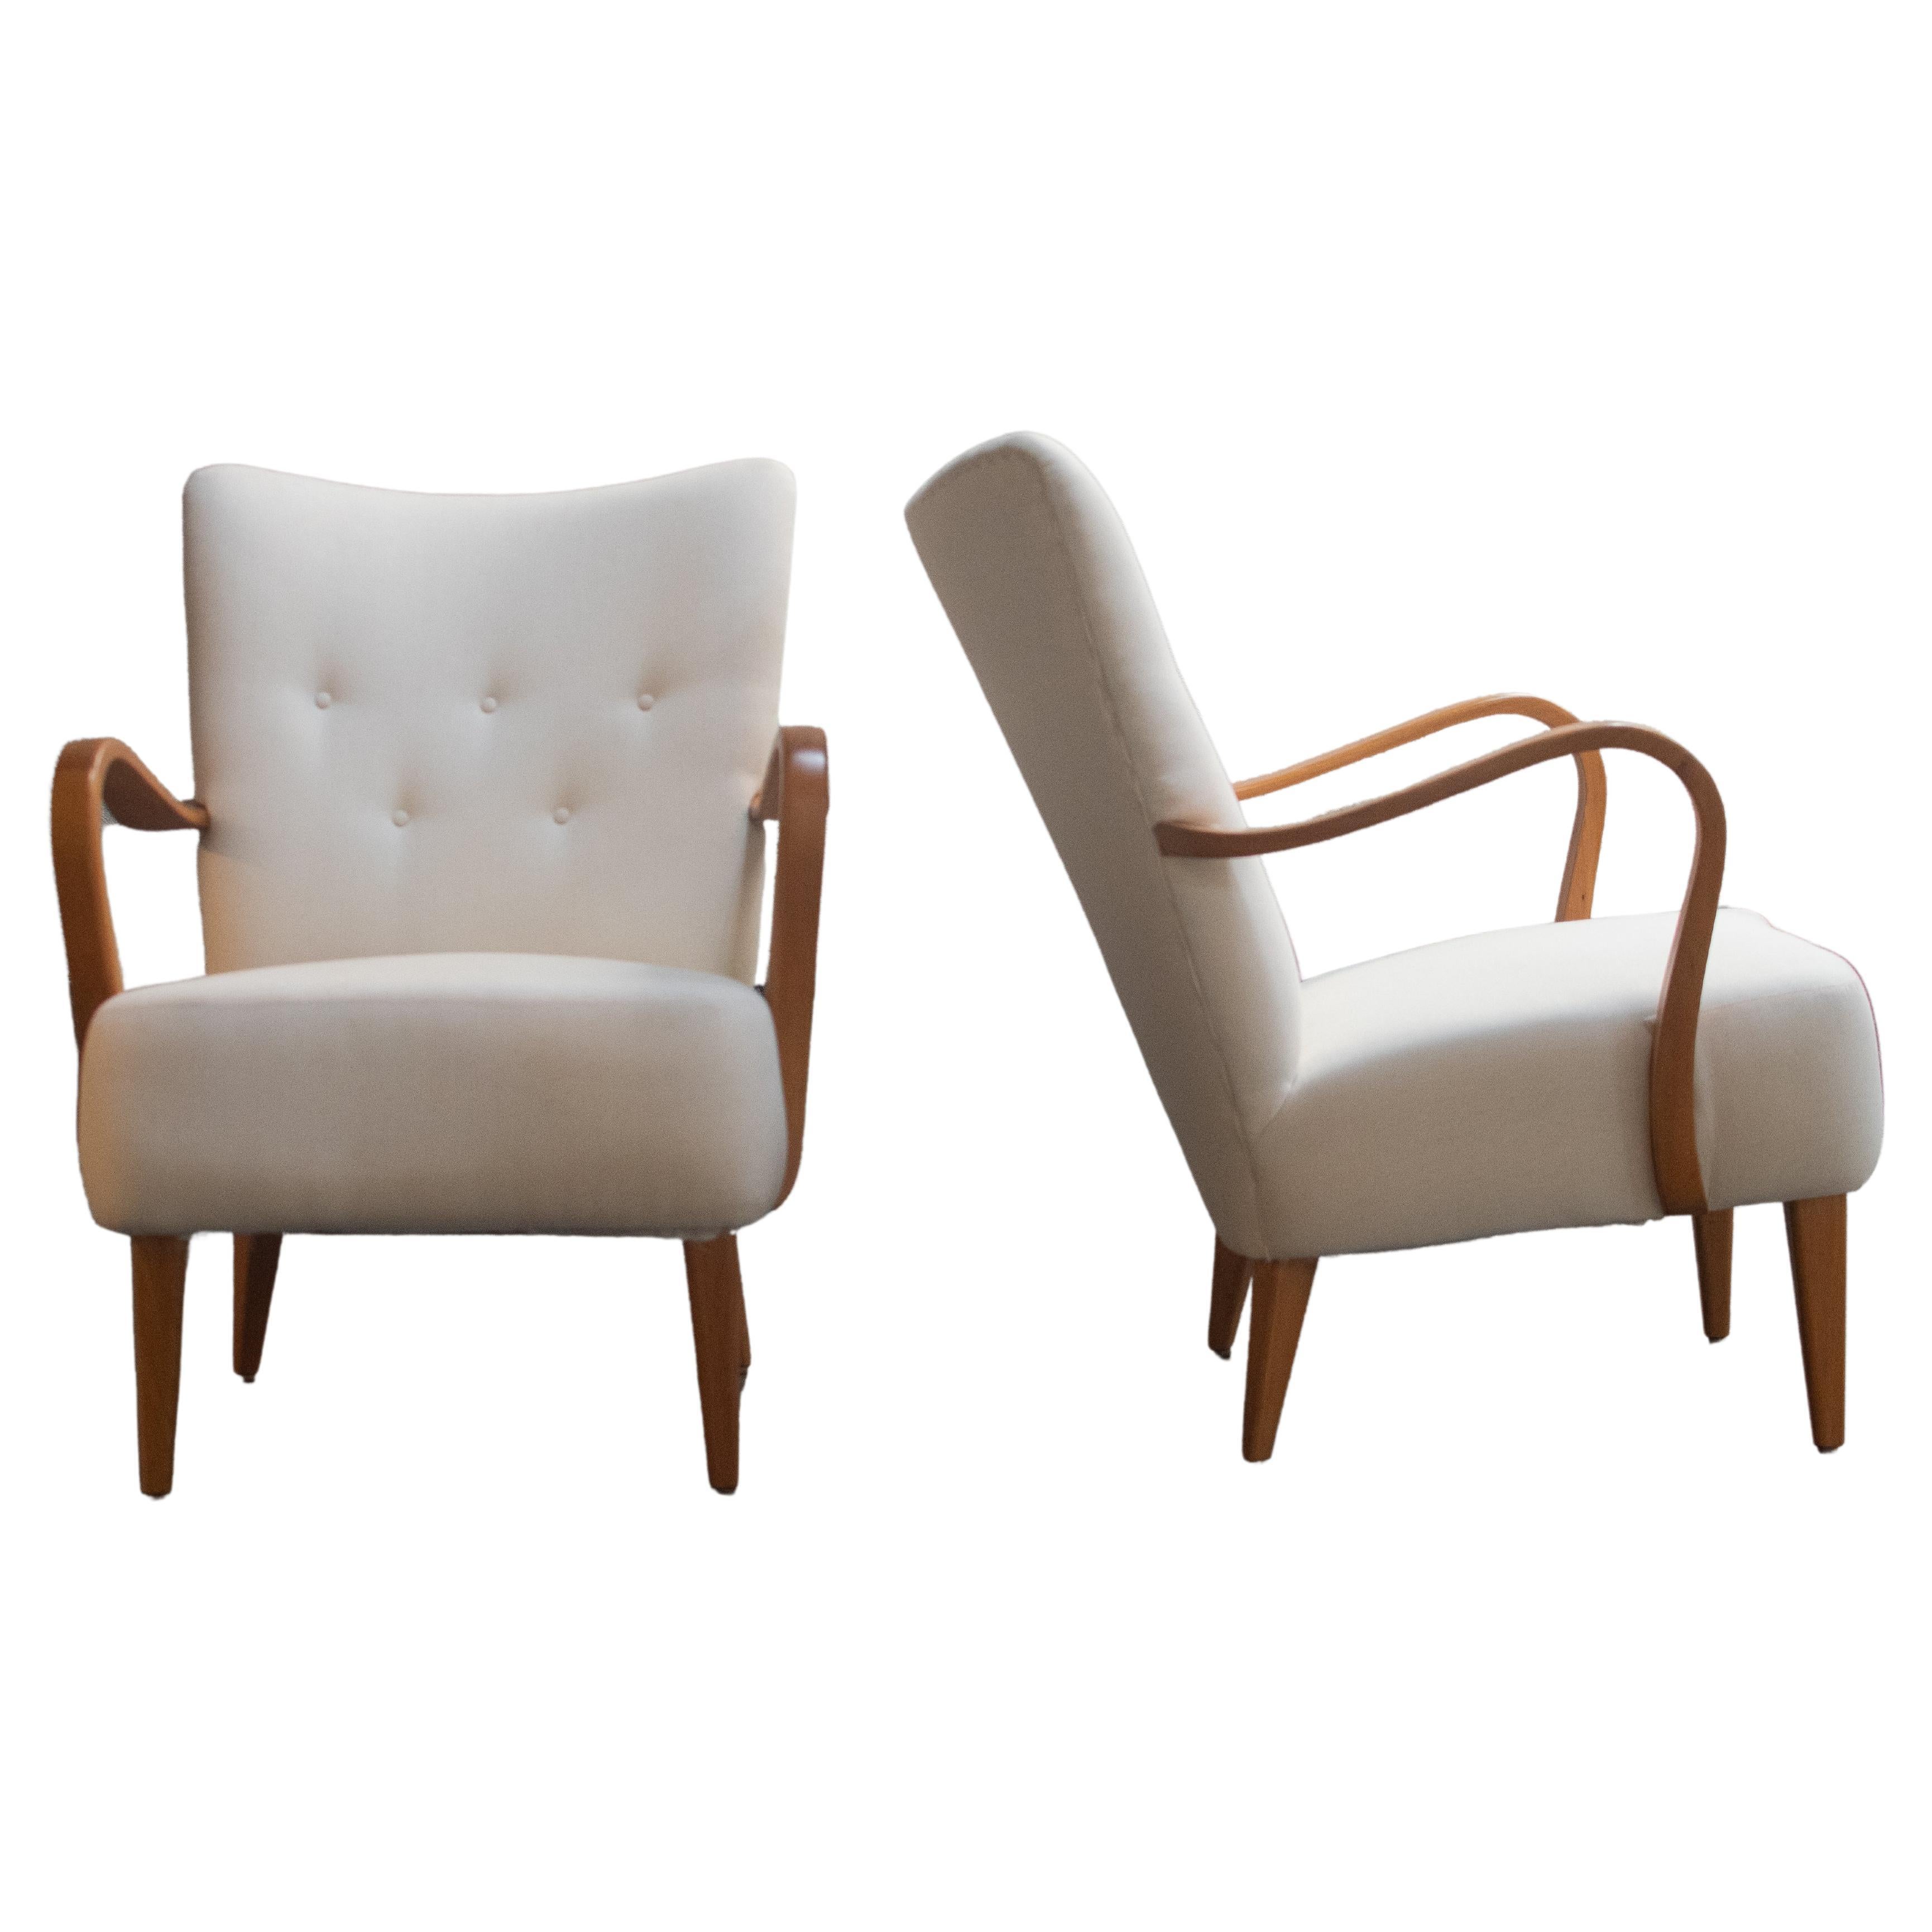 Pair of Scandinavian Modern Arm Chairs  For Sale